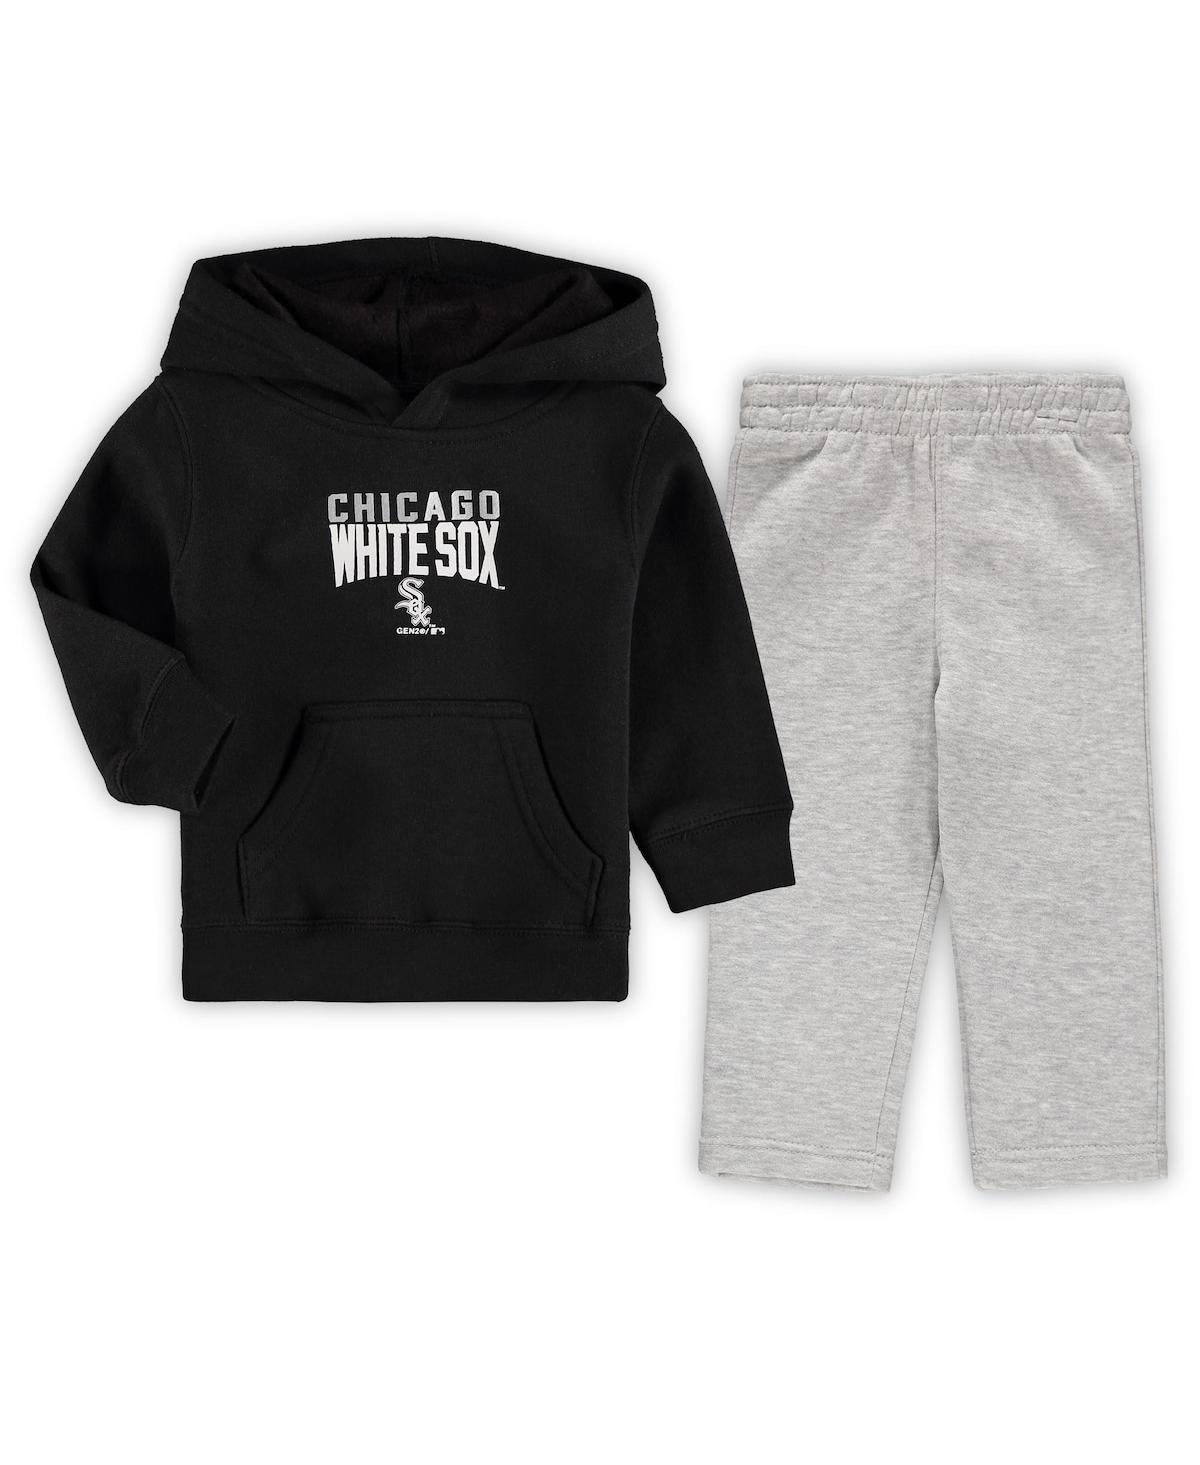 OUTERSTUFF TODDLER BOYS BLACK, HEATHERED GRAY CHICAGO WHITE SOX FAN FLARE FLEECE HOODIE AND PANTS SET